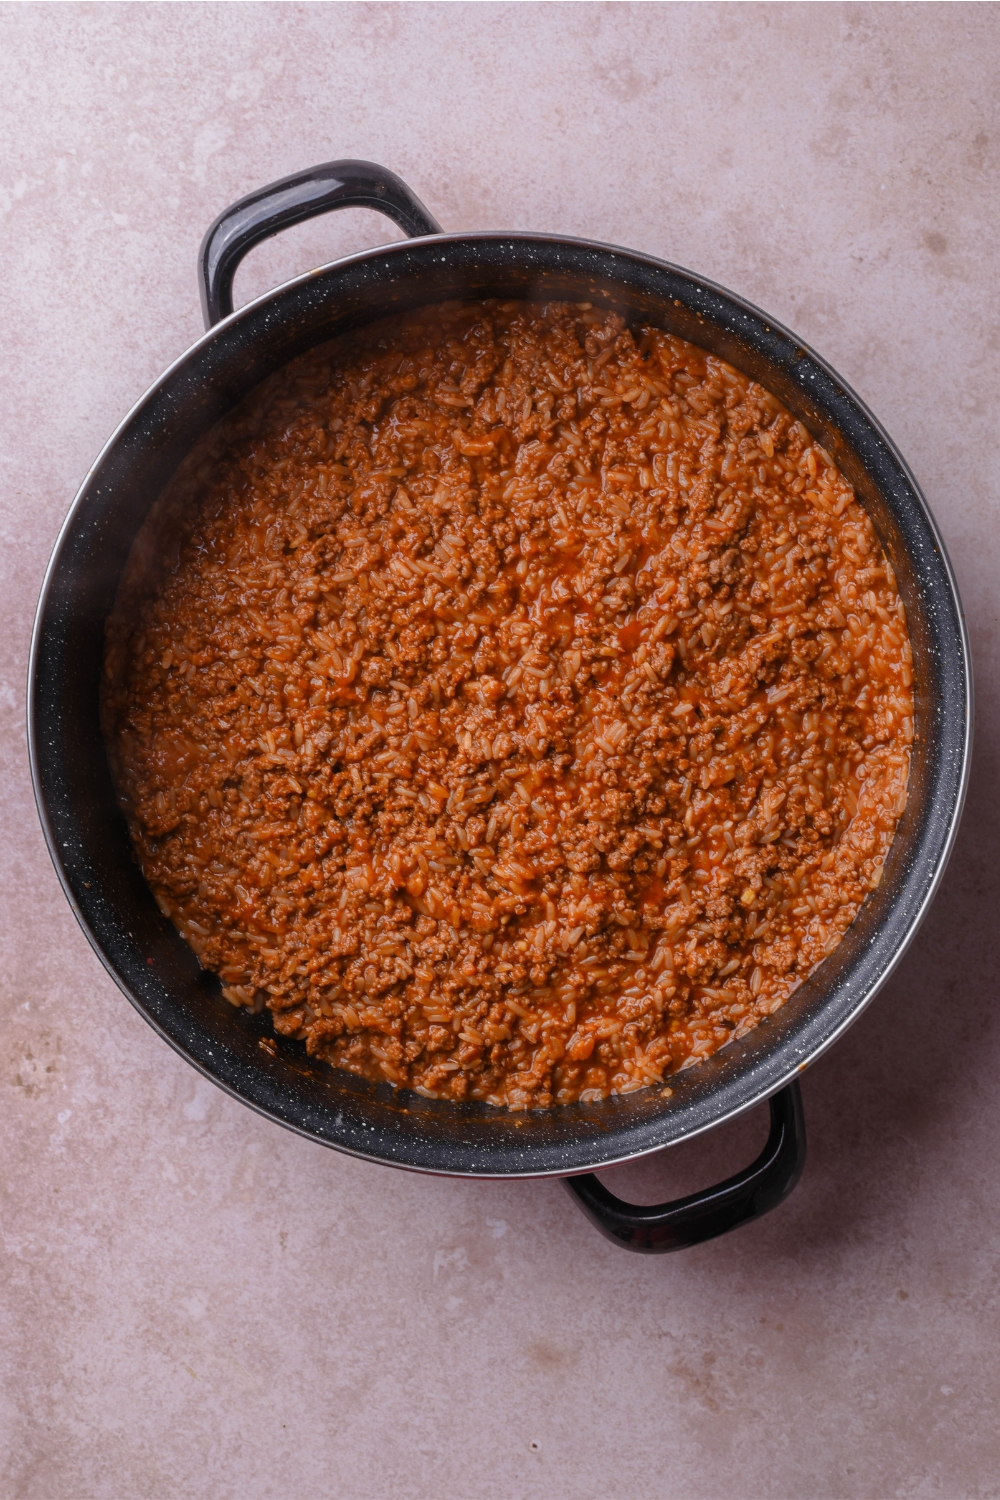 A skillet filled with cooked ground beef in a tomato sauce.